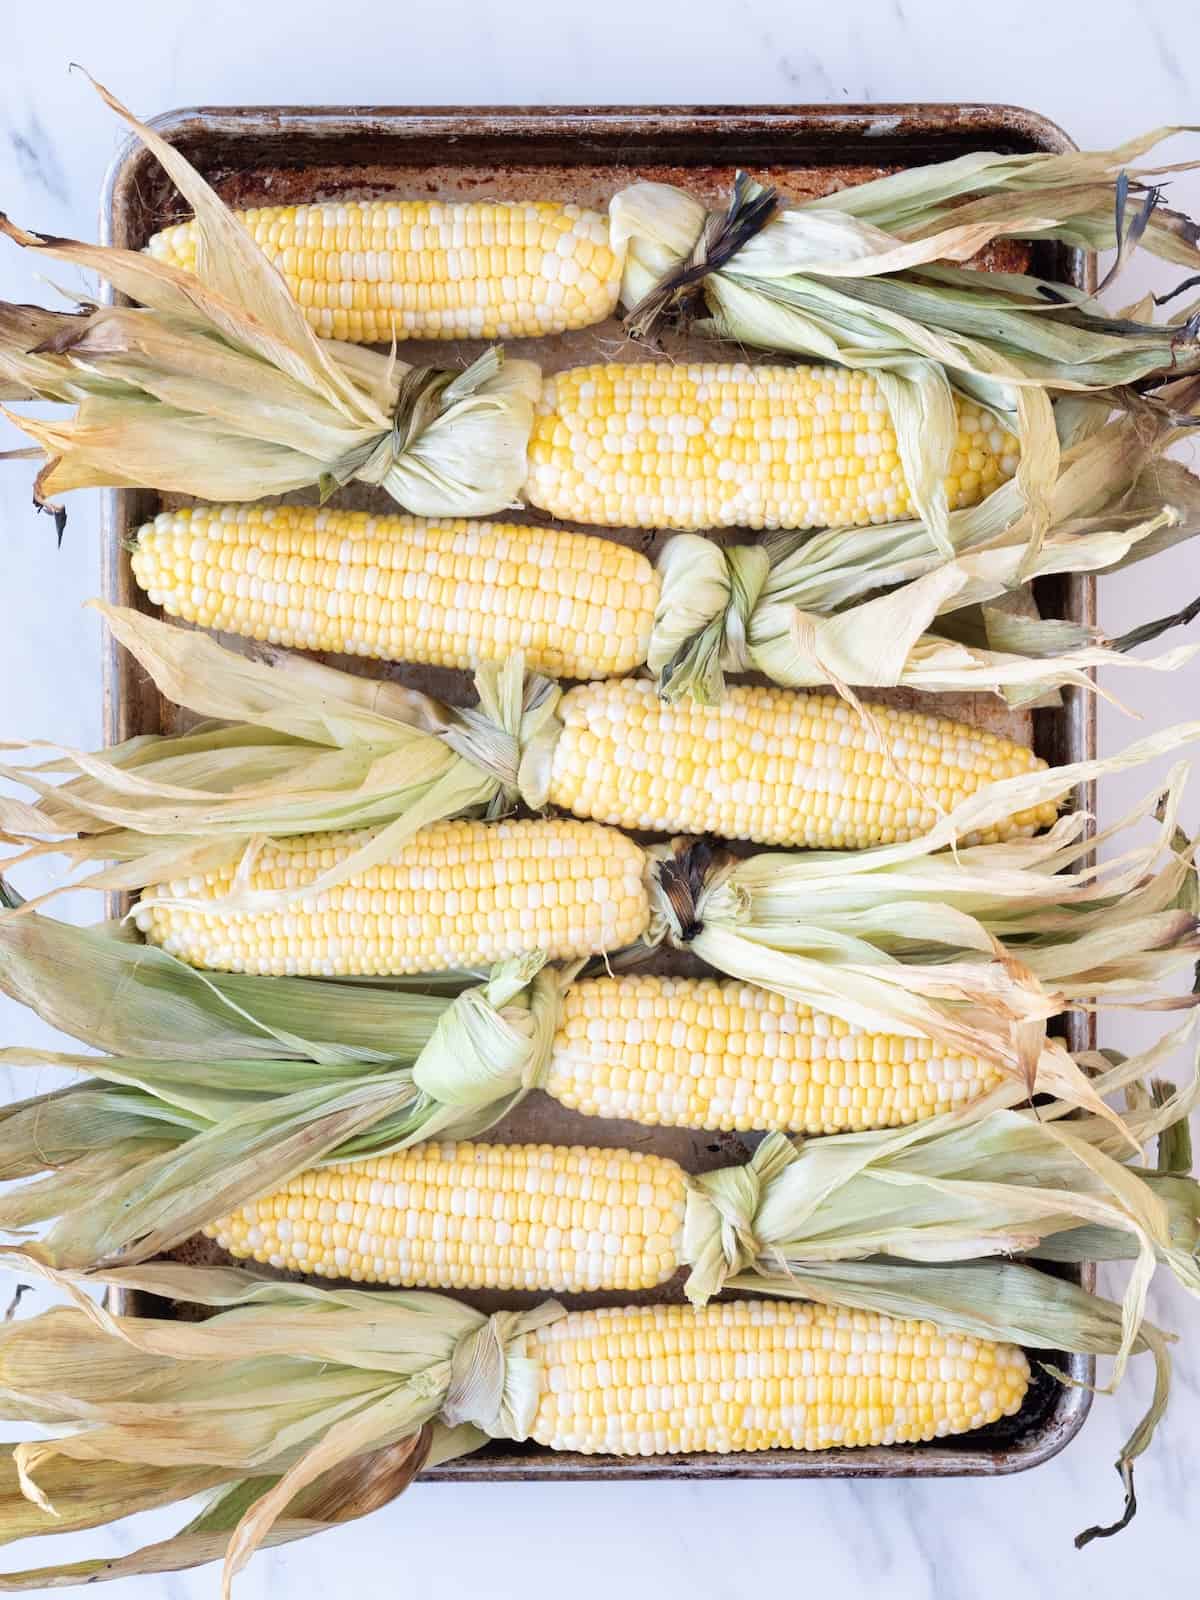 A sheet pan with 8 corn on the cobs with husks pulled back but still attached, and the corn on the cob visible.